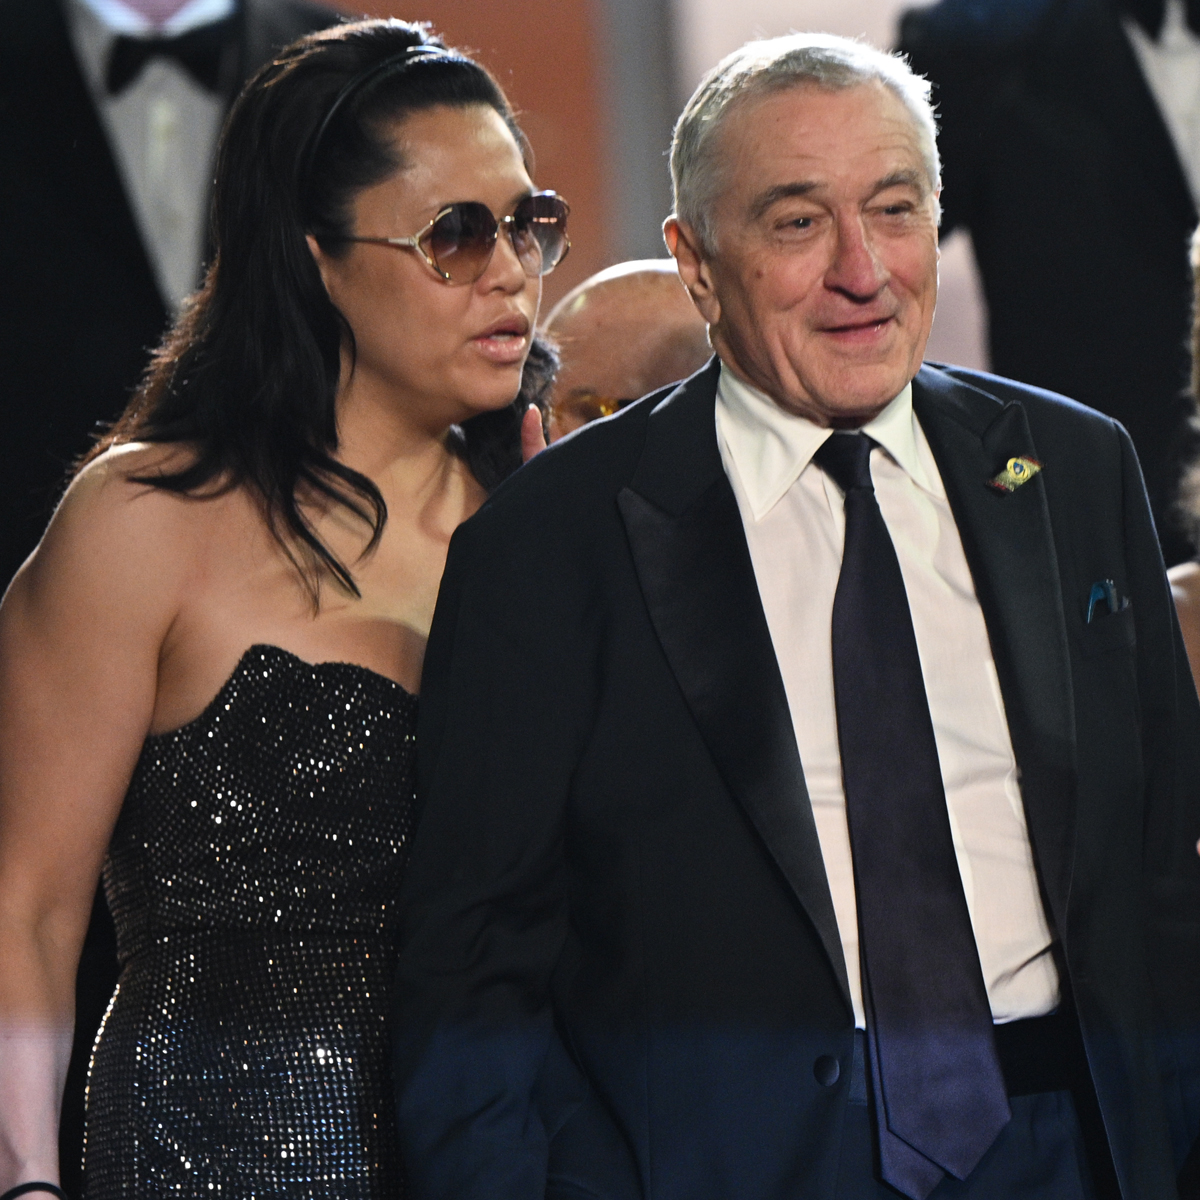 Robert De Niro Says Tiffany Chen Does “Heavy Lifting” With Their Baby